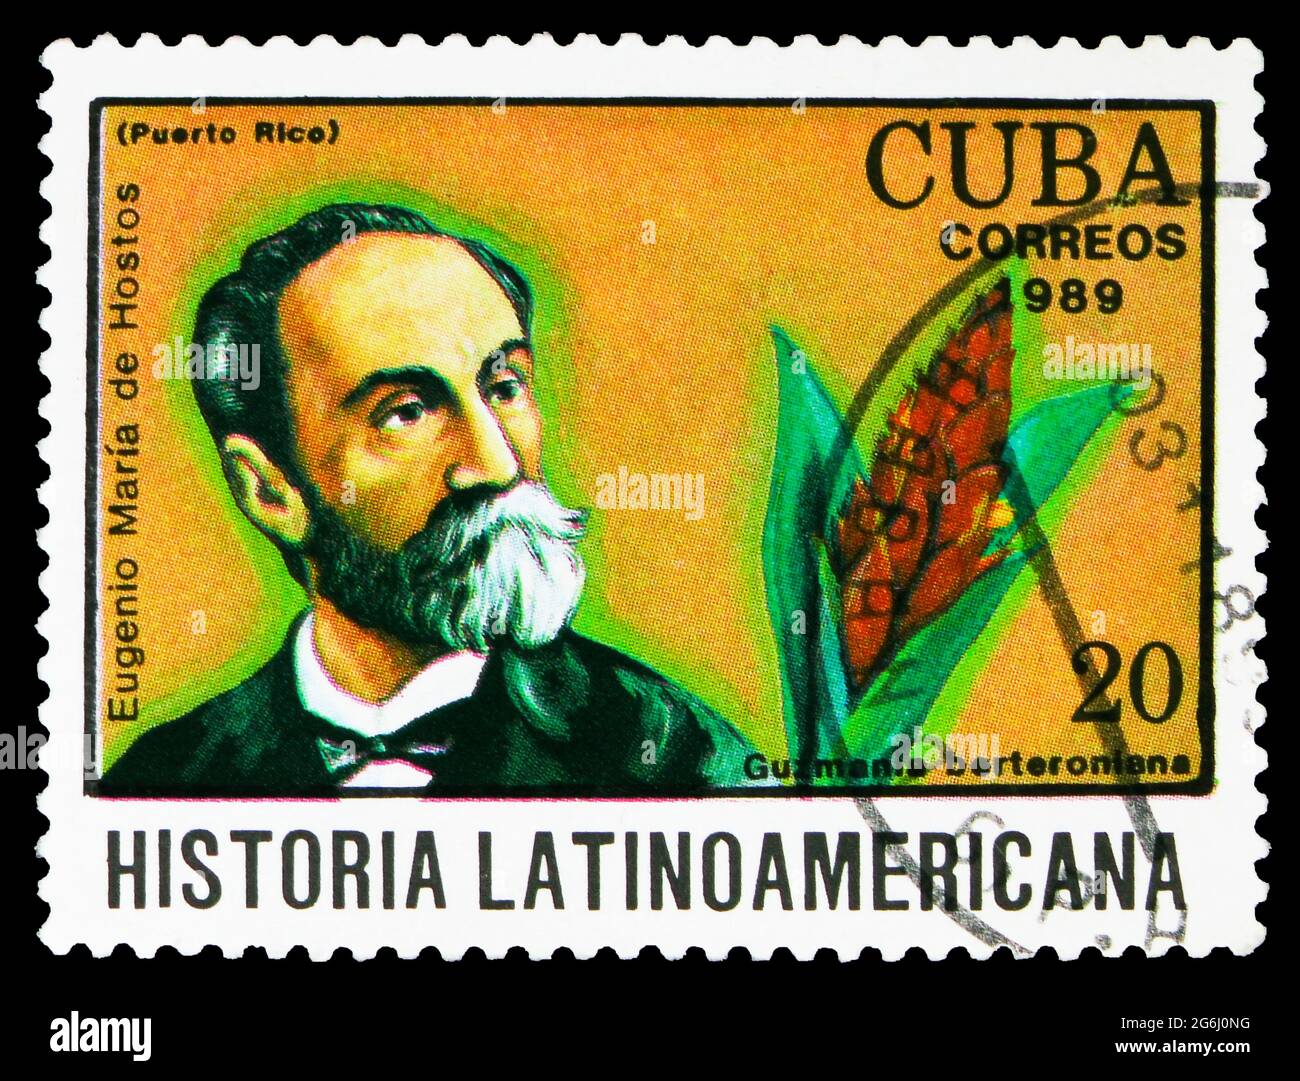 MOSCOW, RUSSIA - MARCH 21, 2020: Postage stamp printed in Cuba shows Eugenio Mari de Hostos, Latin american history serie, circa 1989 Stock Photo